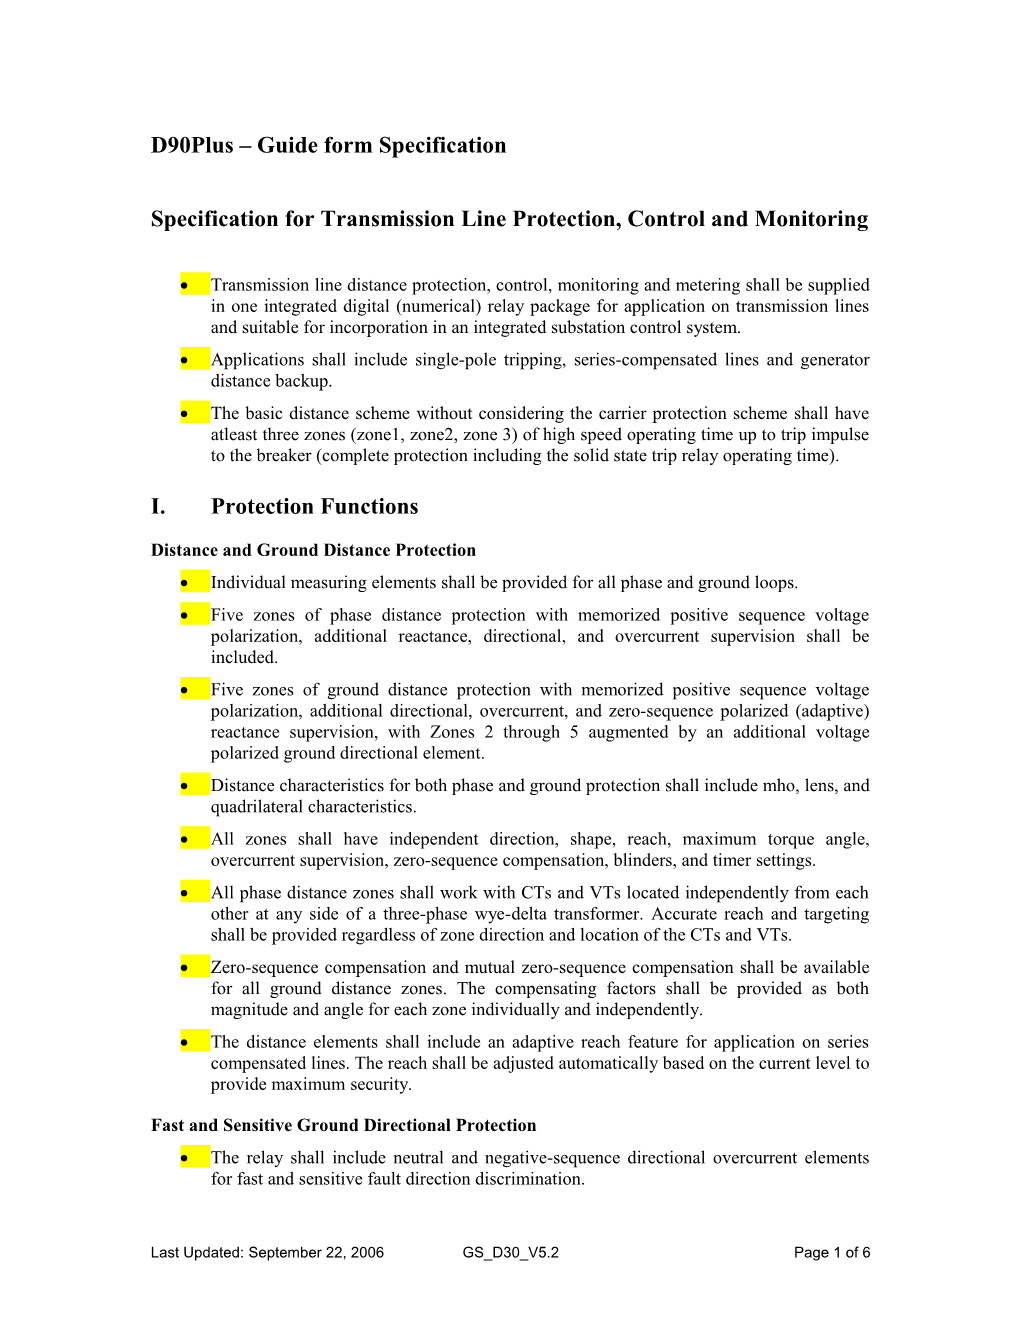 Specification for Transmission Line Protection, Control and Monitoring